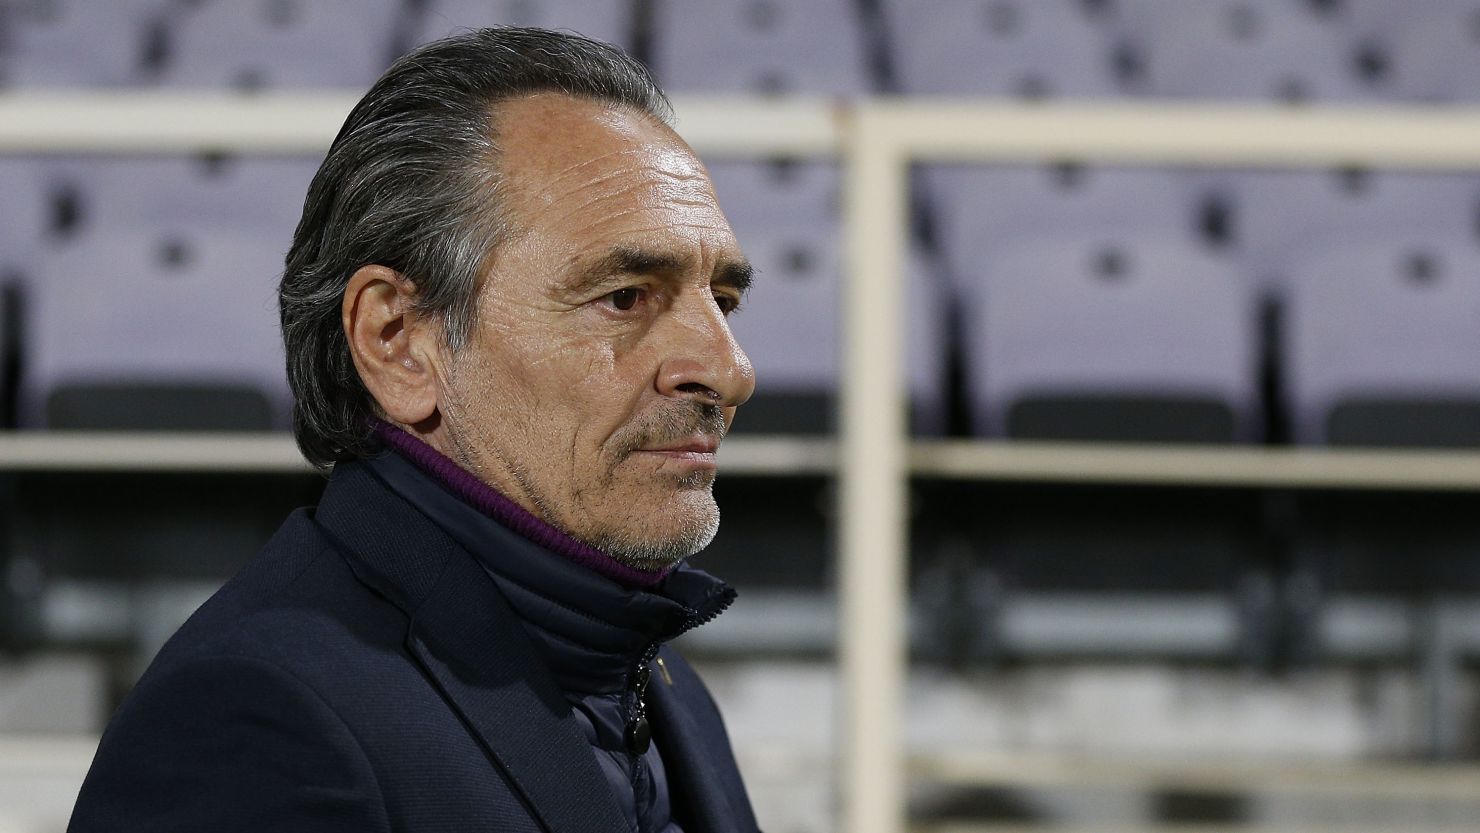 Cesare Prandelli has stepped down from his role as head coach Fiorentina.